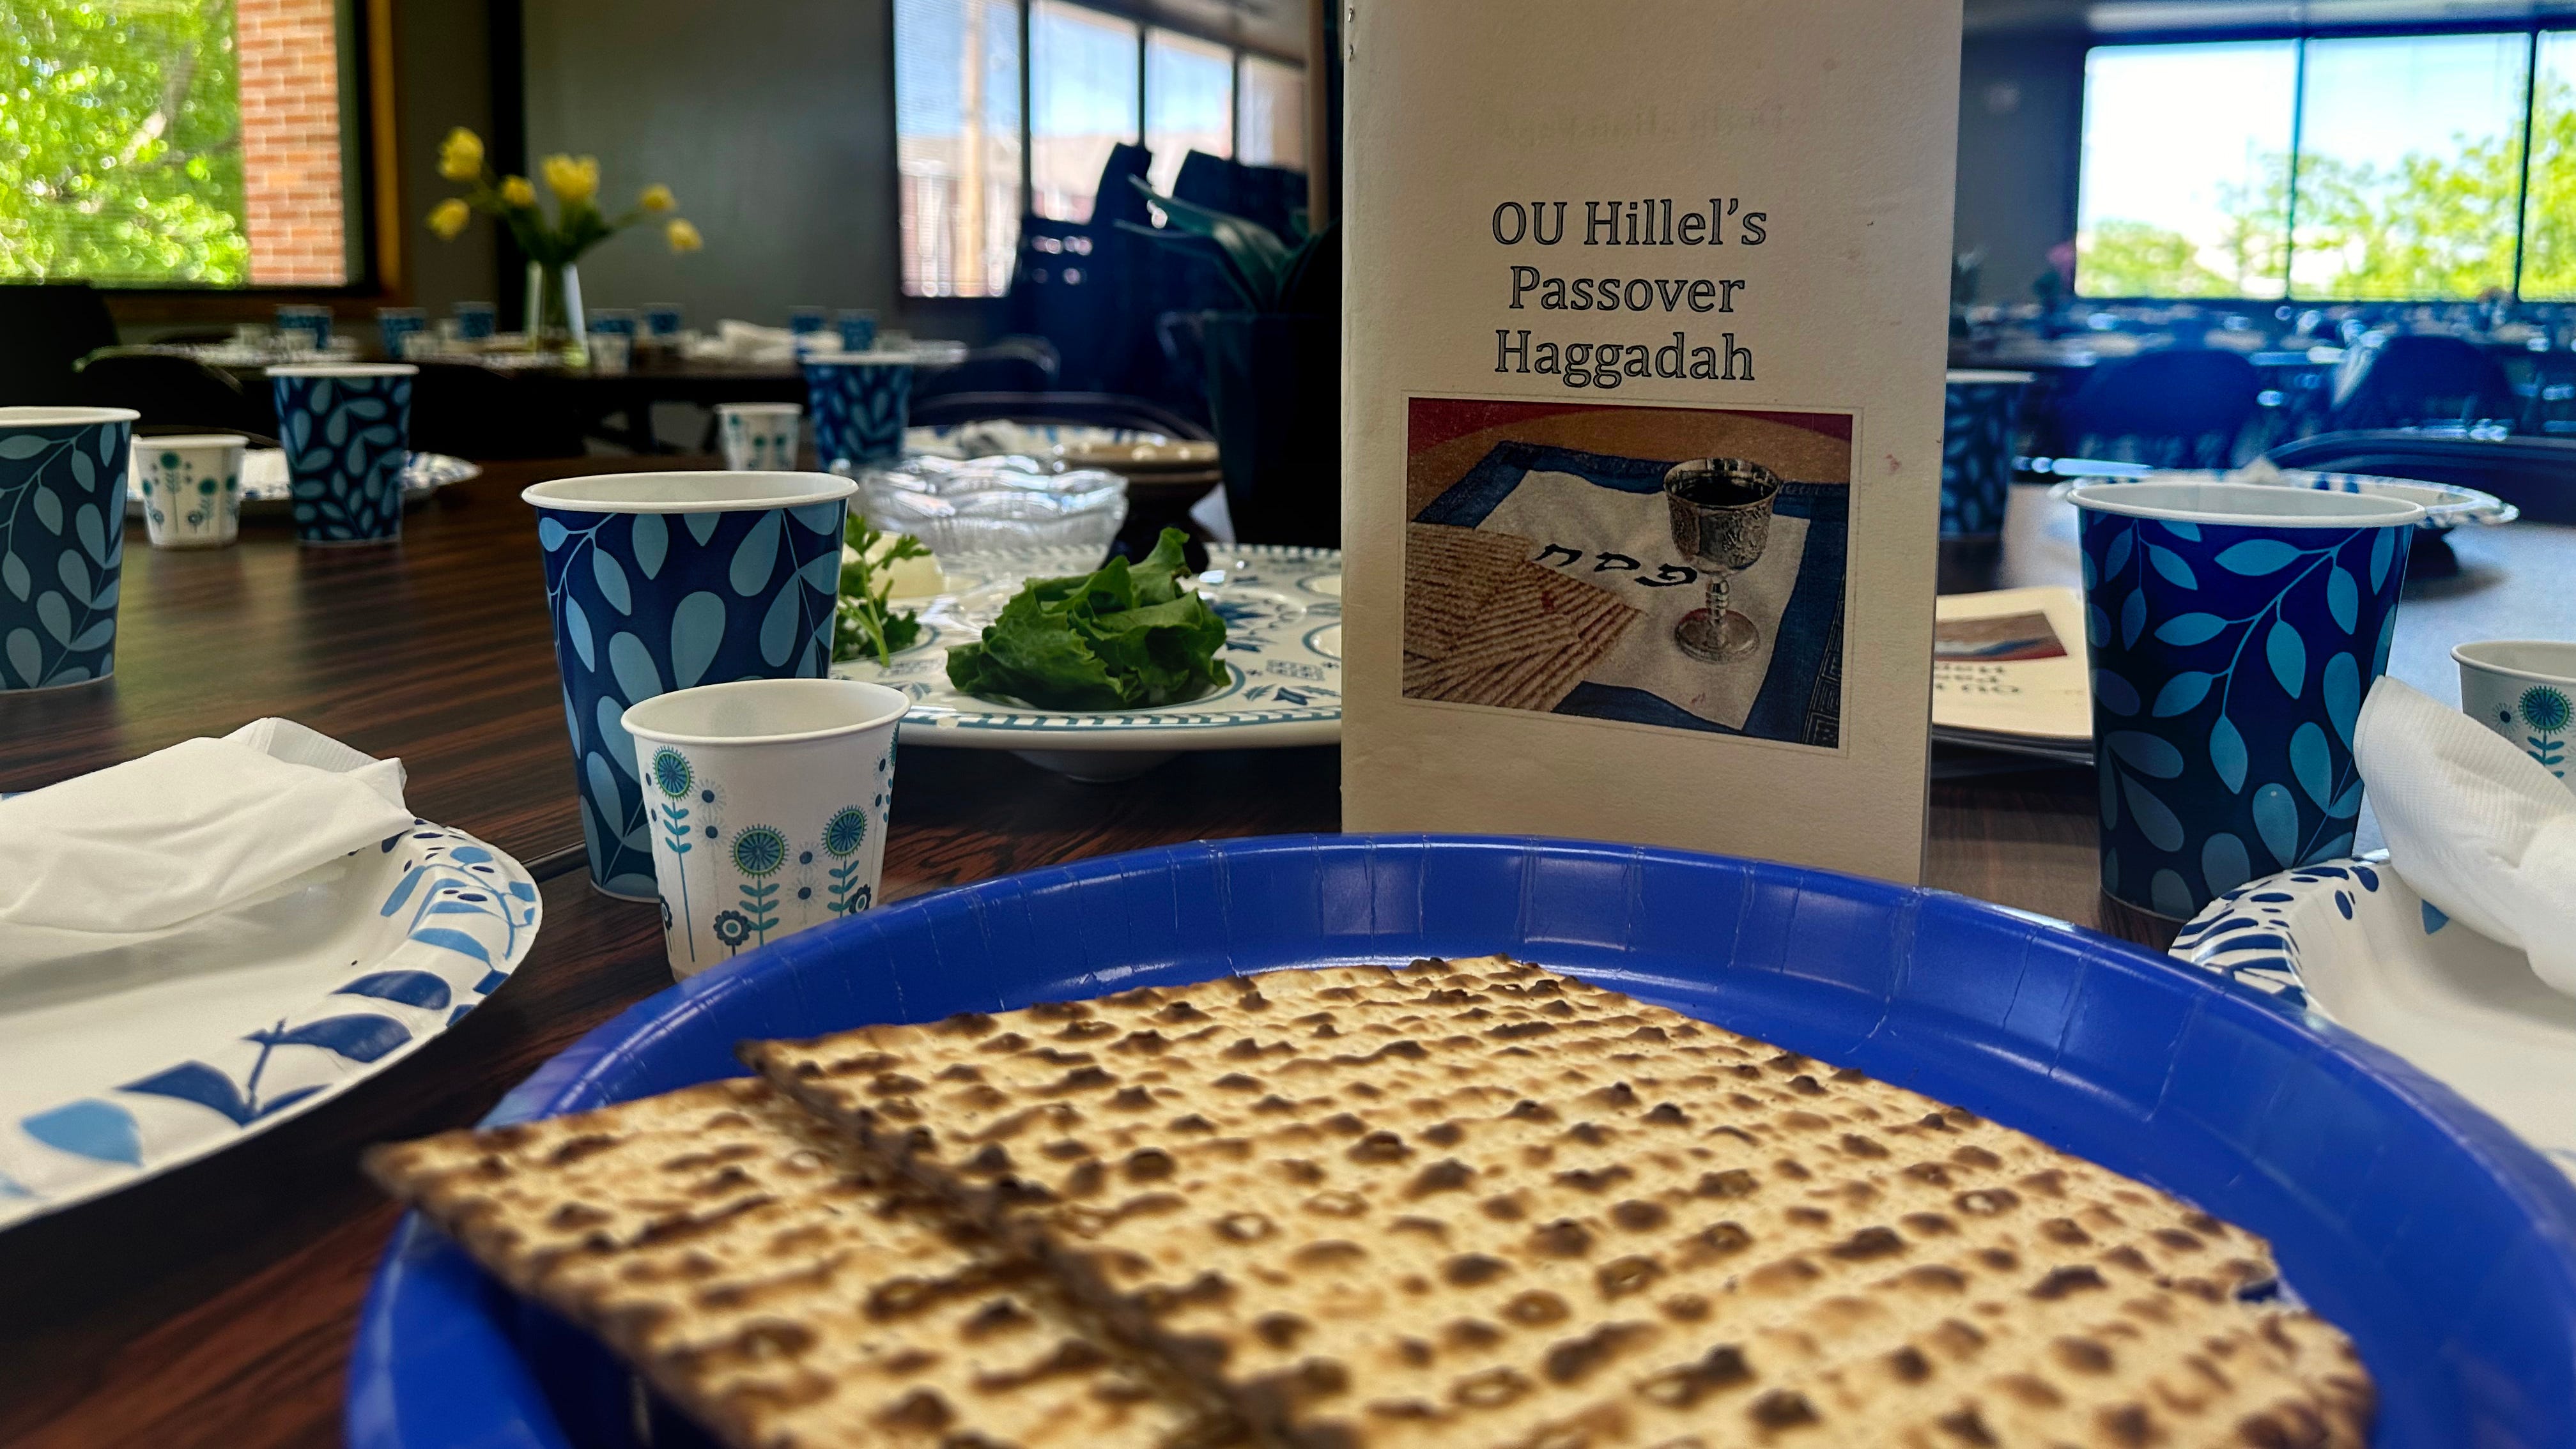 Jewish students from OU find community while preparing for Passover